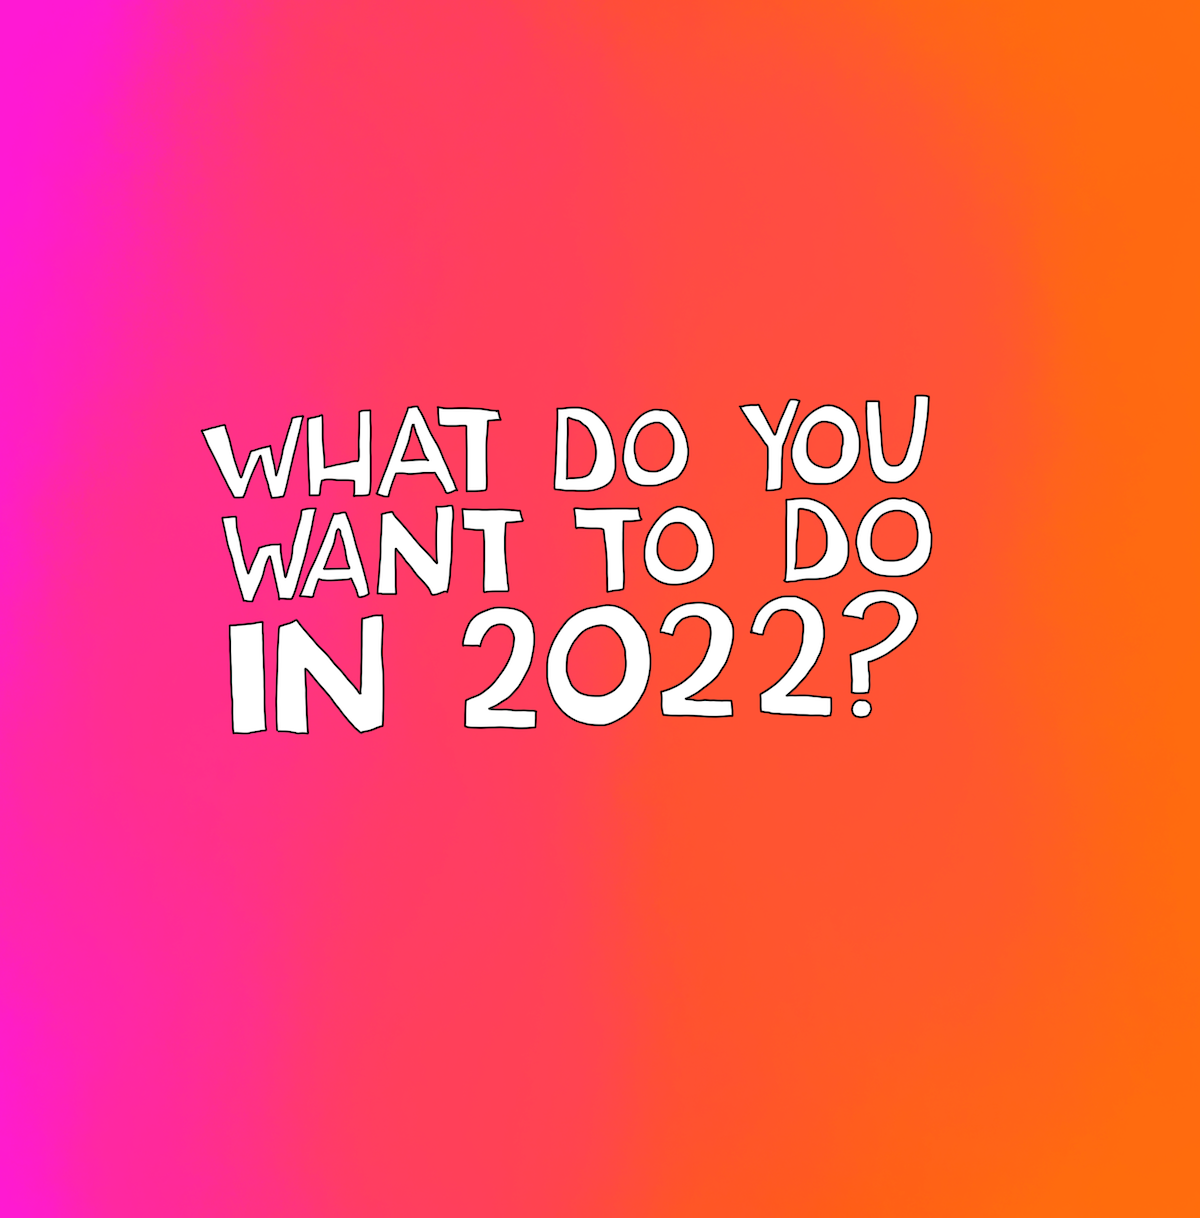 New Year Journaling + Meditation Class: What do you want to DO in 2022?